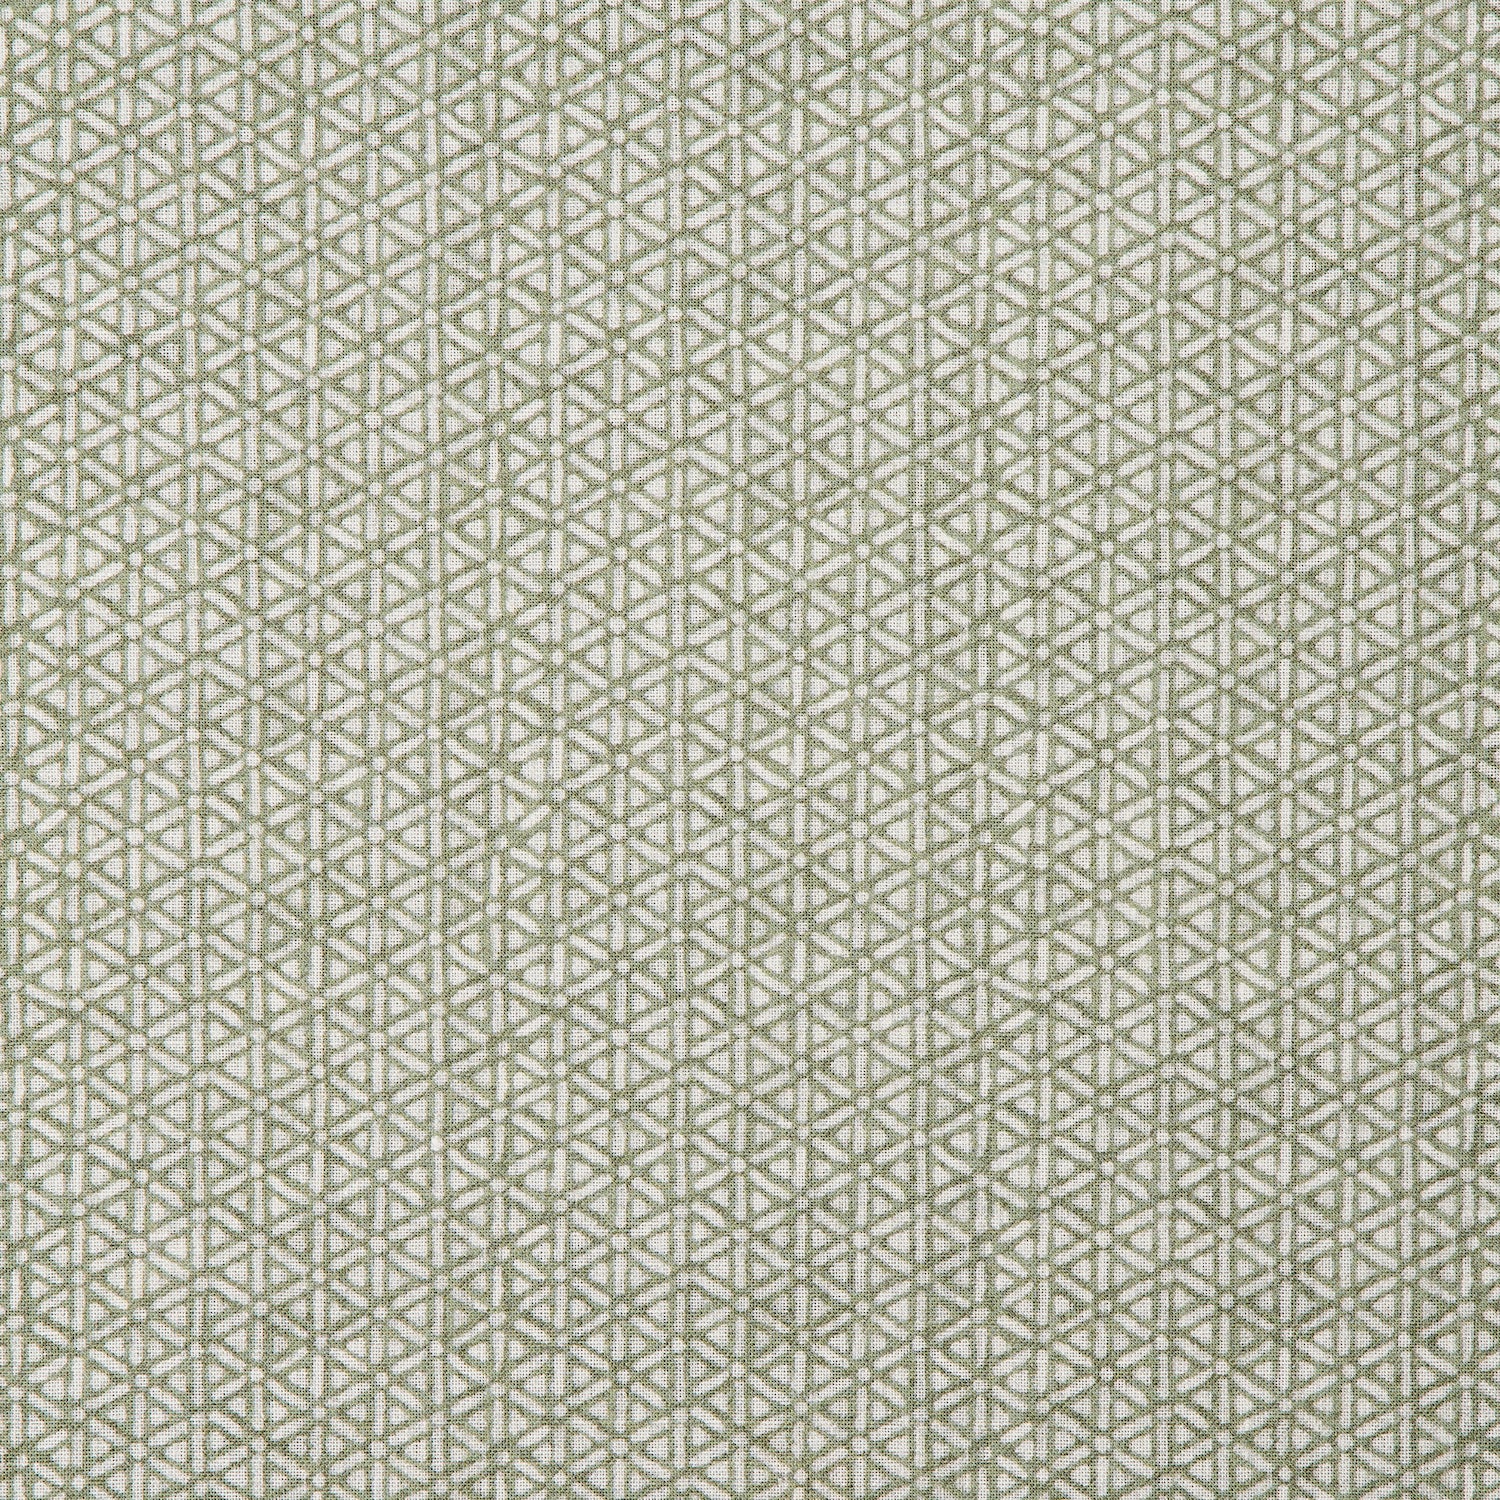 Detail of a linen fabric in a detailed geometric pattern in white on a light green field.